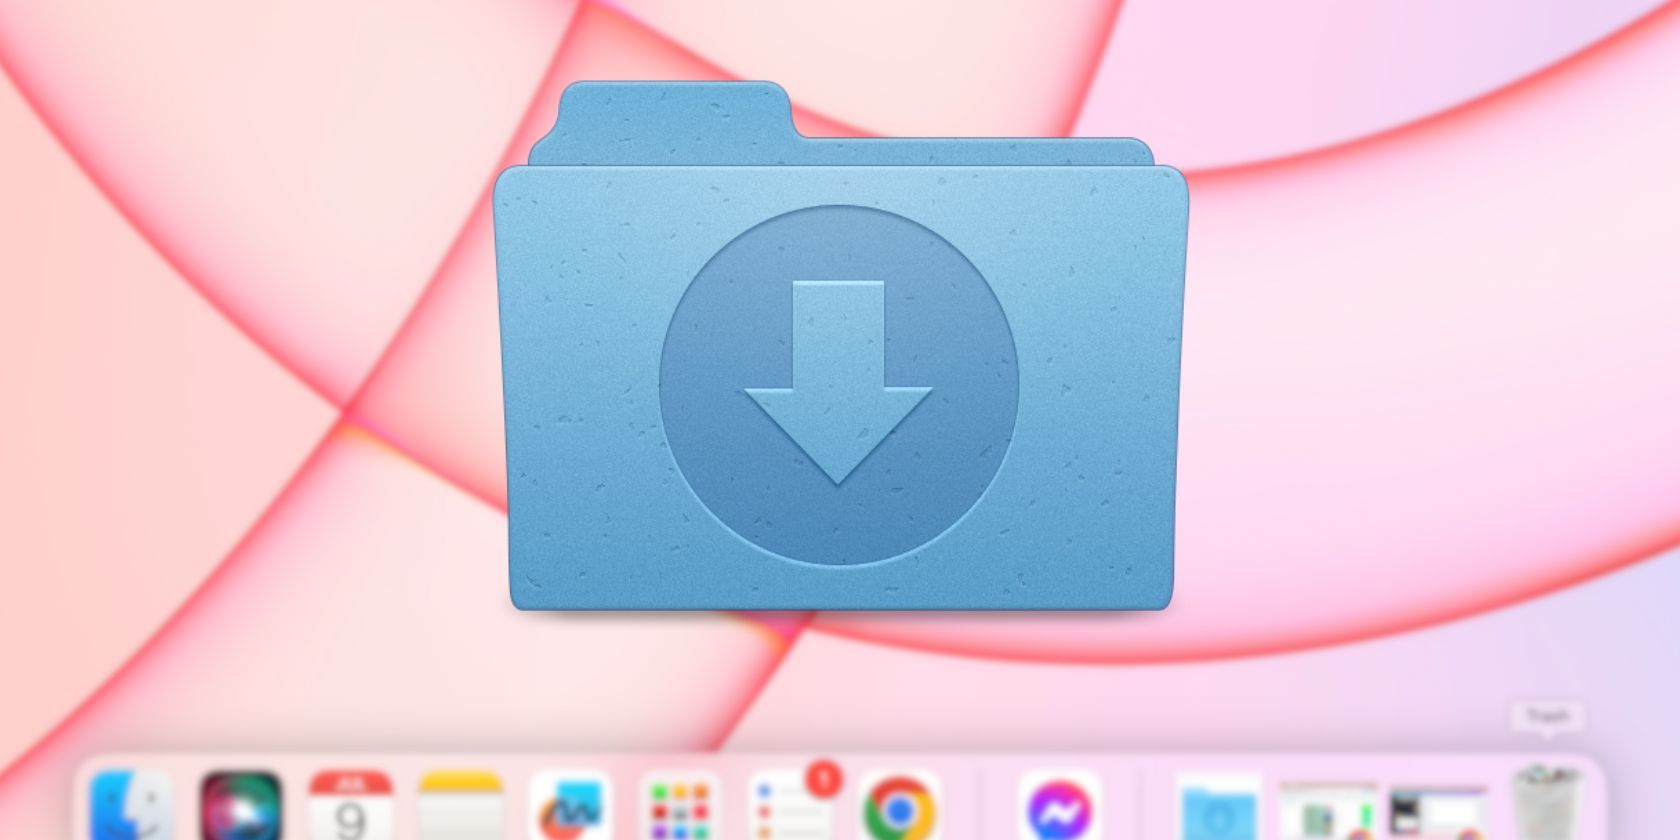 Downloads Folder Icon on the Homescreen of Mac